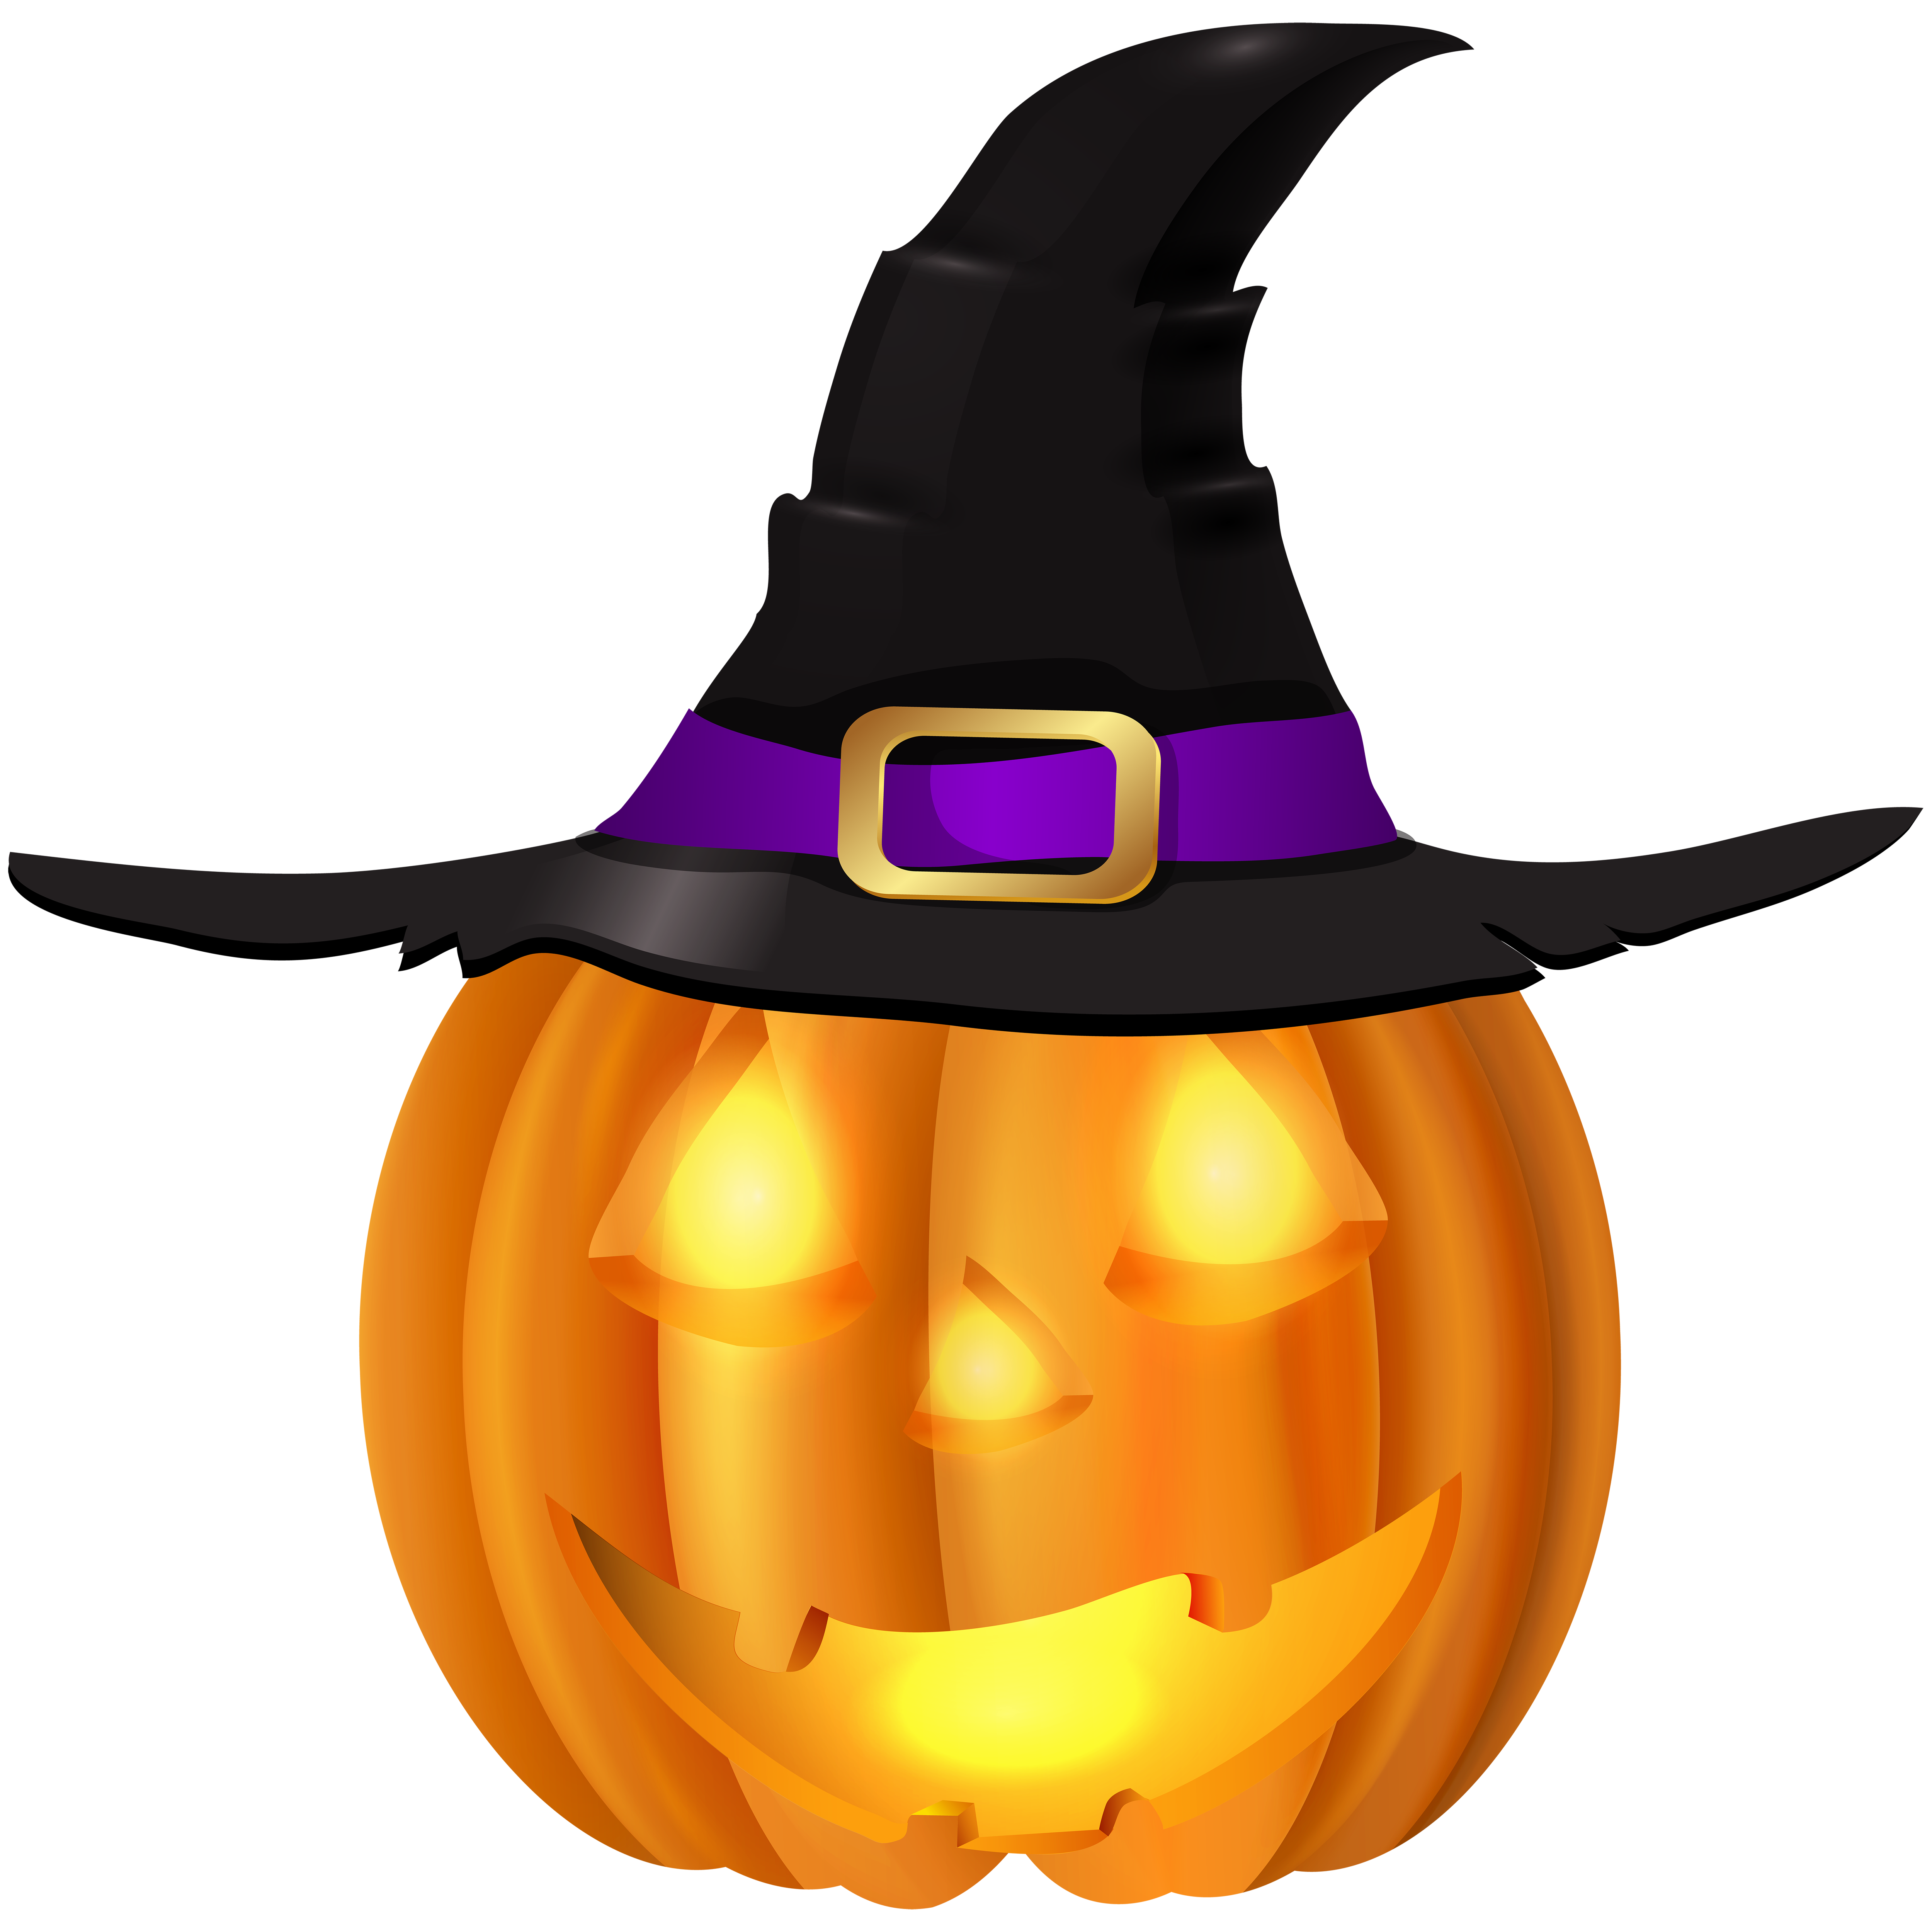 Halloween Pumpkin With Witch Hat Transparent Image